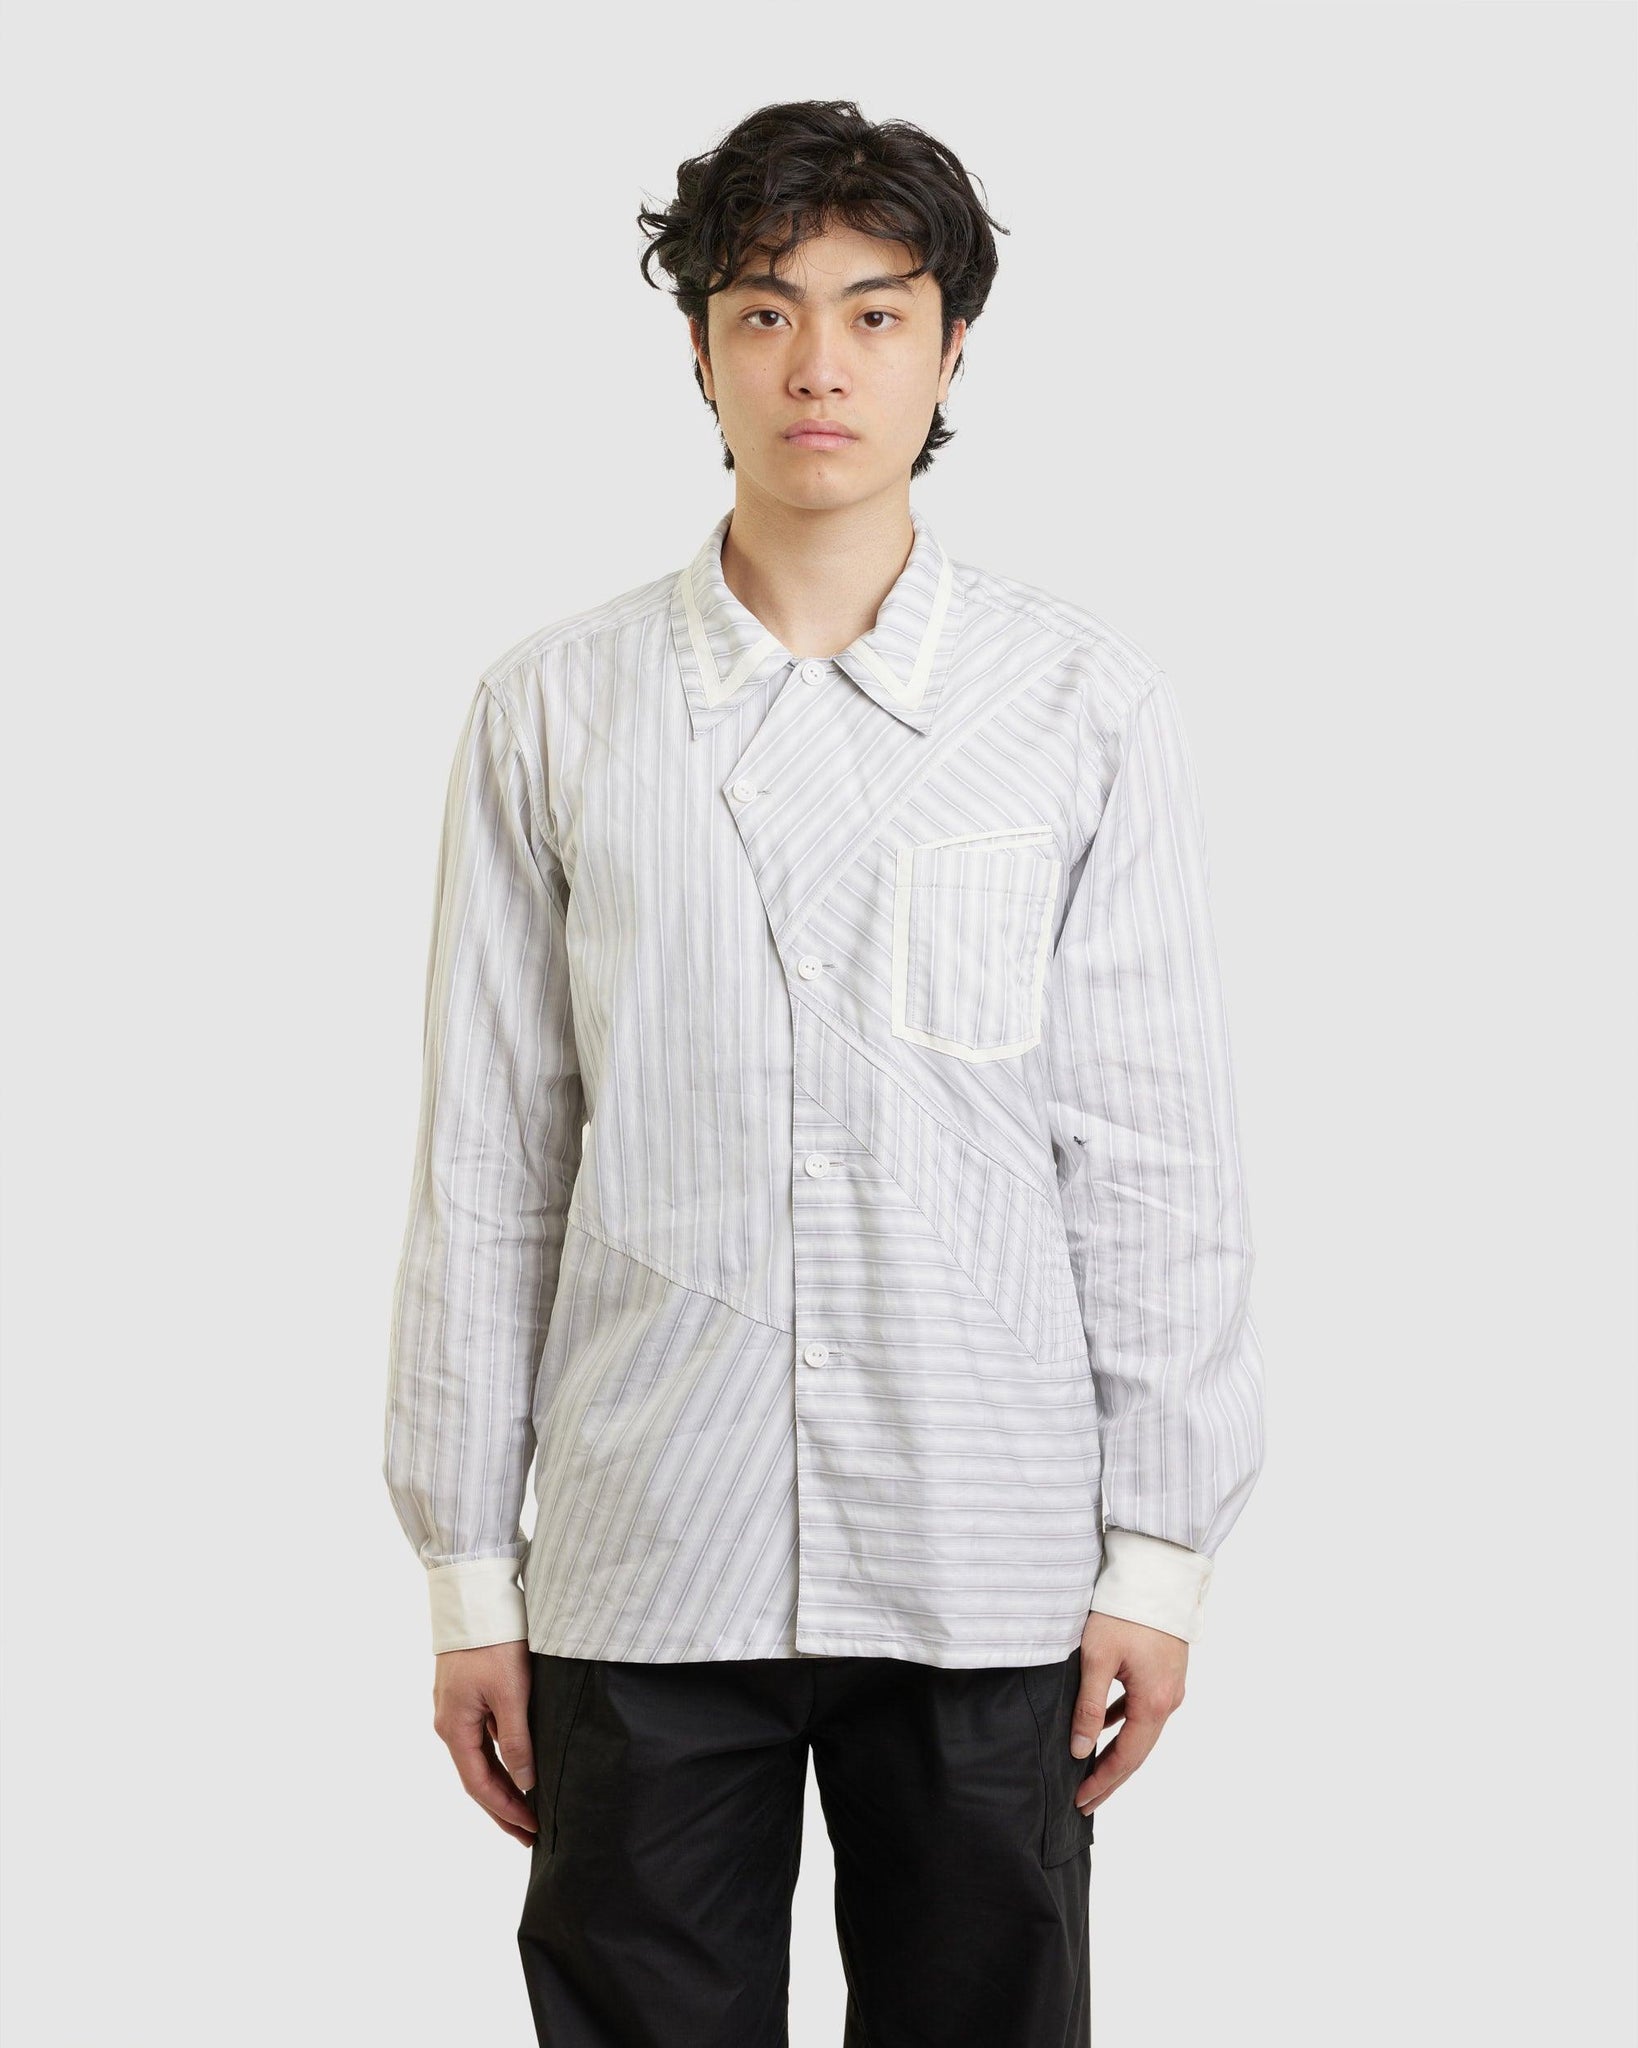 Aspasia Shirt - {{ collection.title }} - Chinatown Country Club 